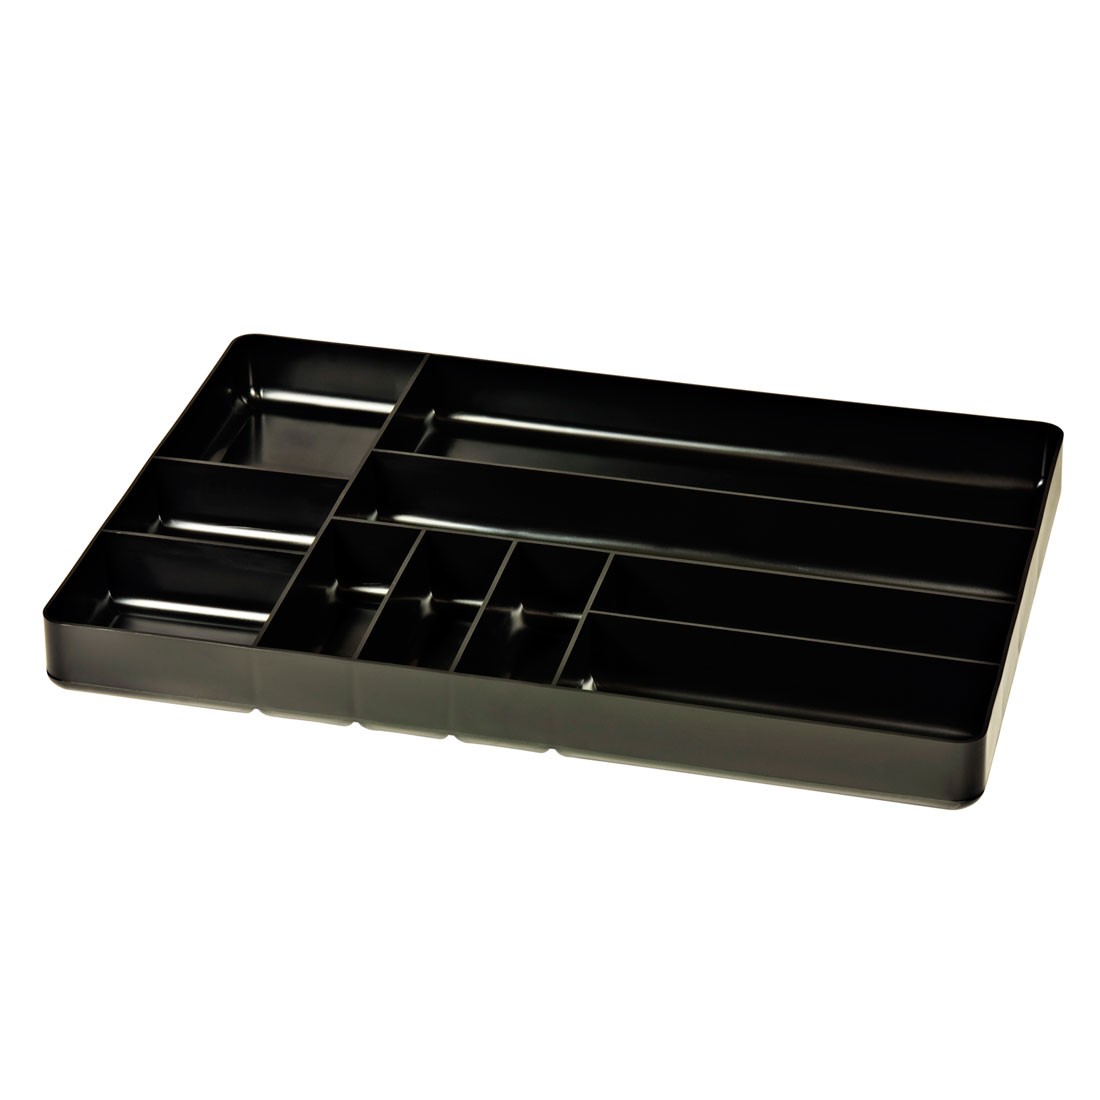 Ernst Manufacturing Organizer Tray 10-compartments Black